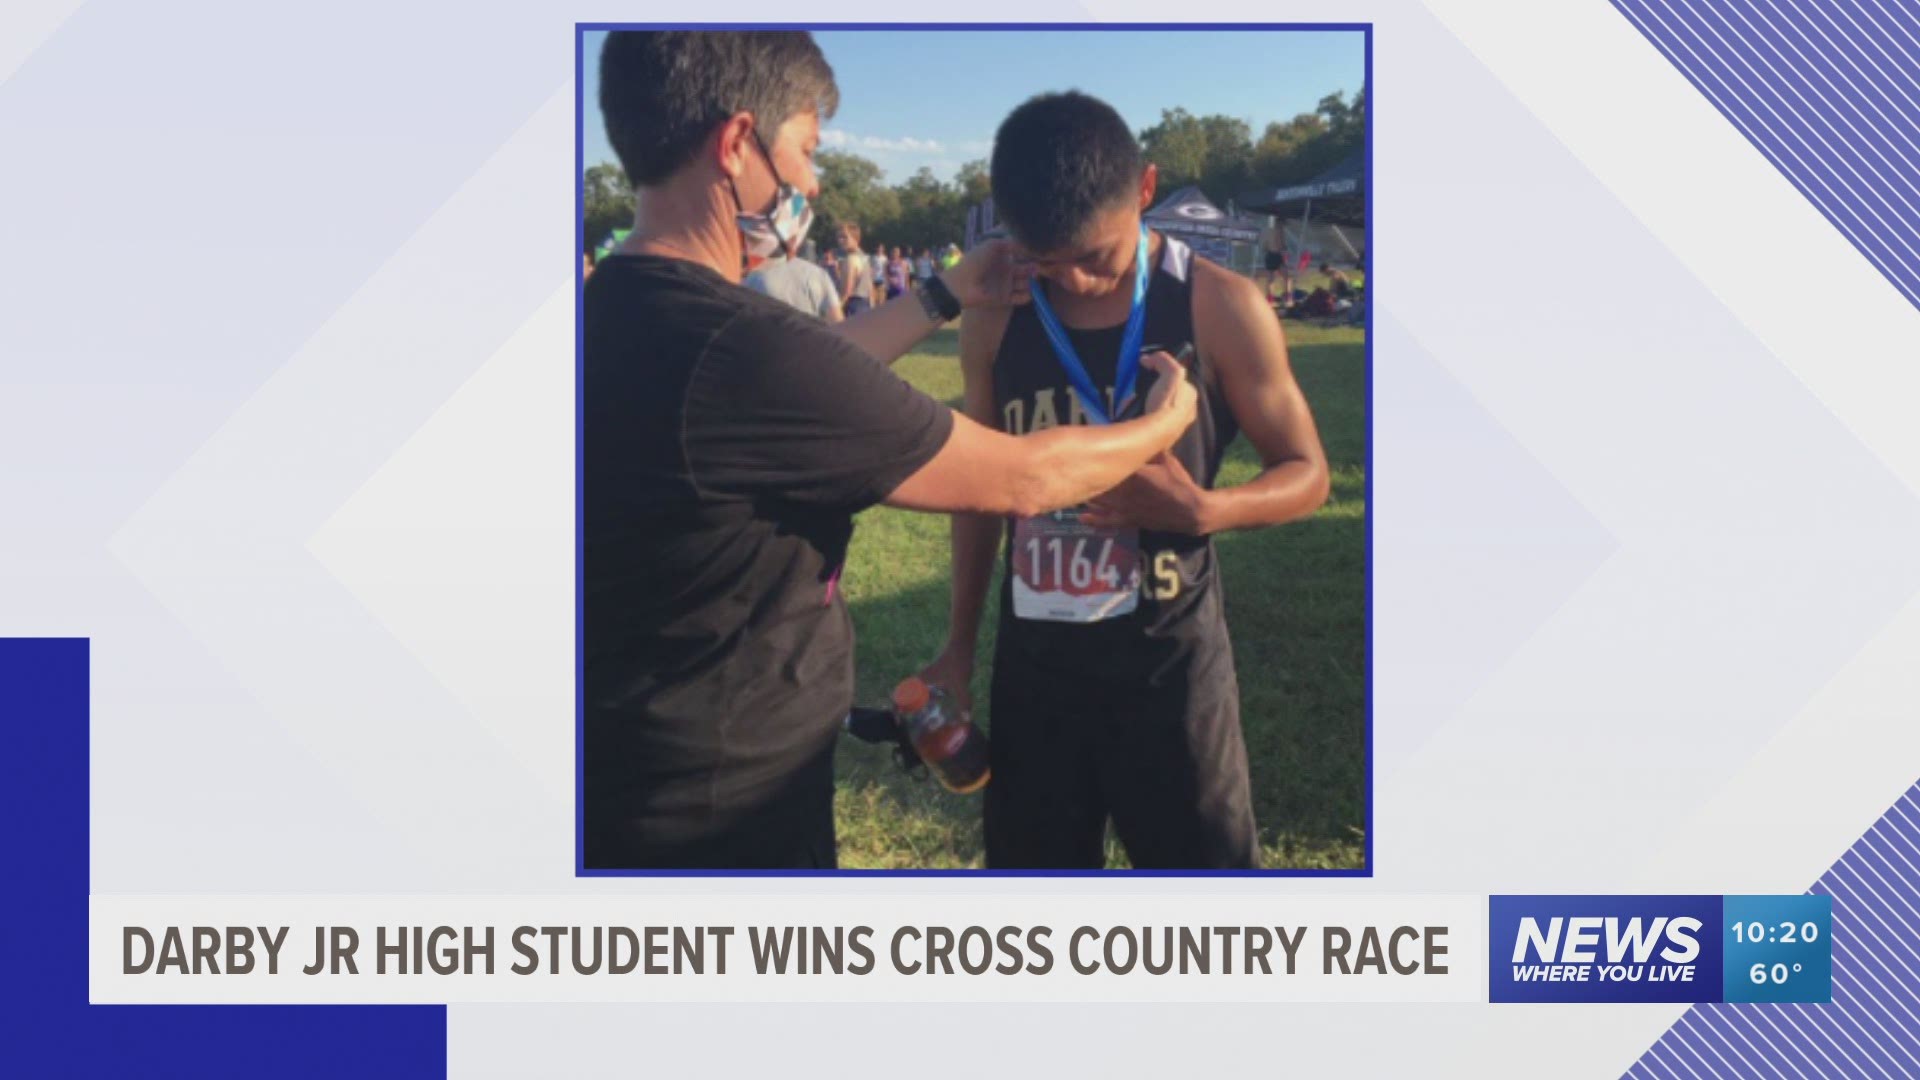 Darby Jr. High student wins cross country race.